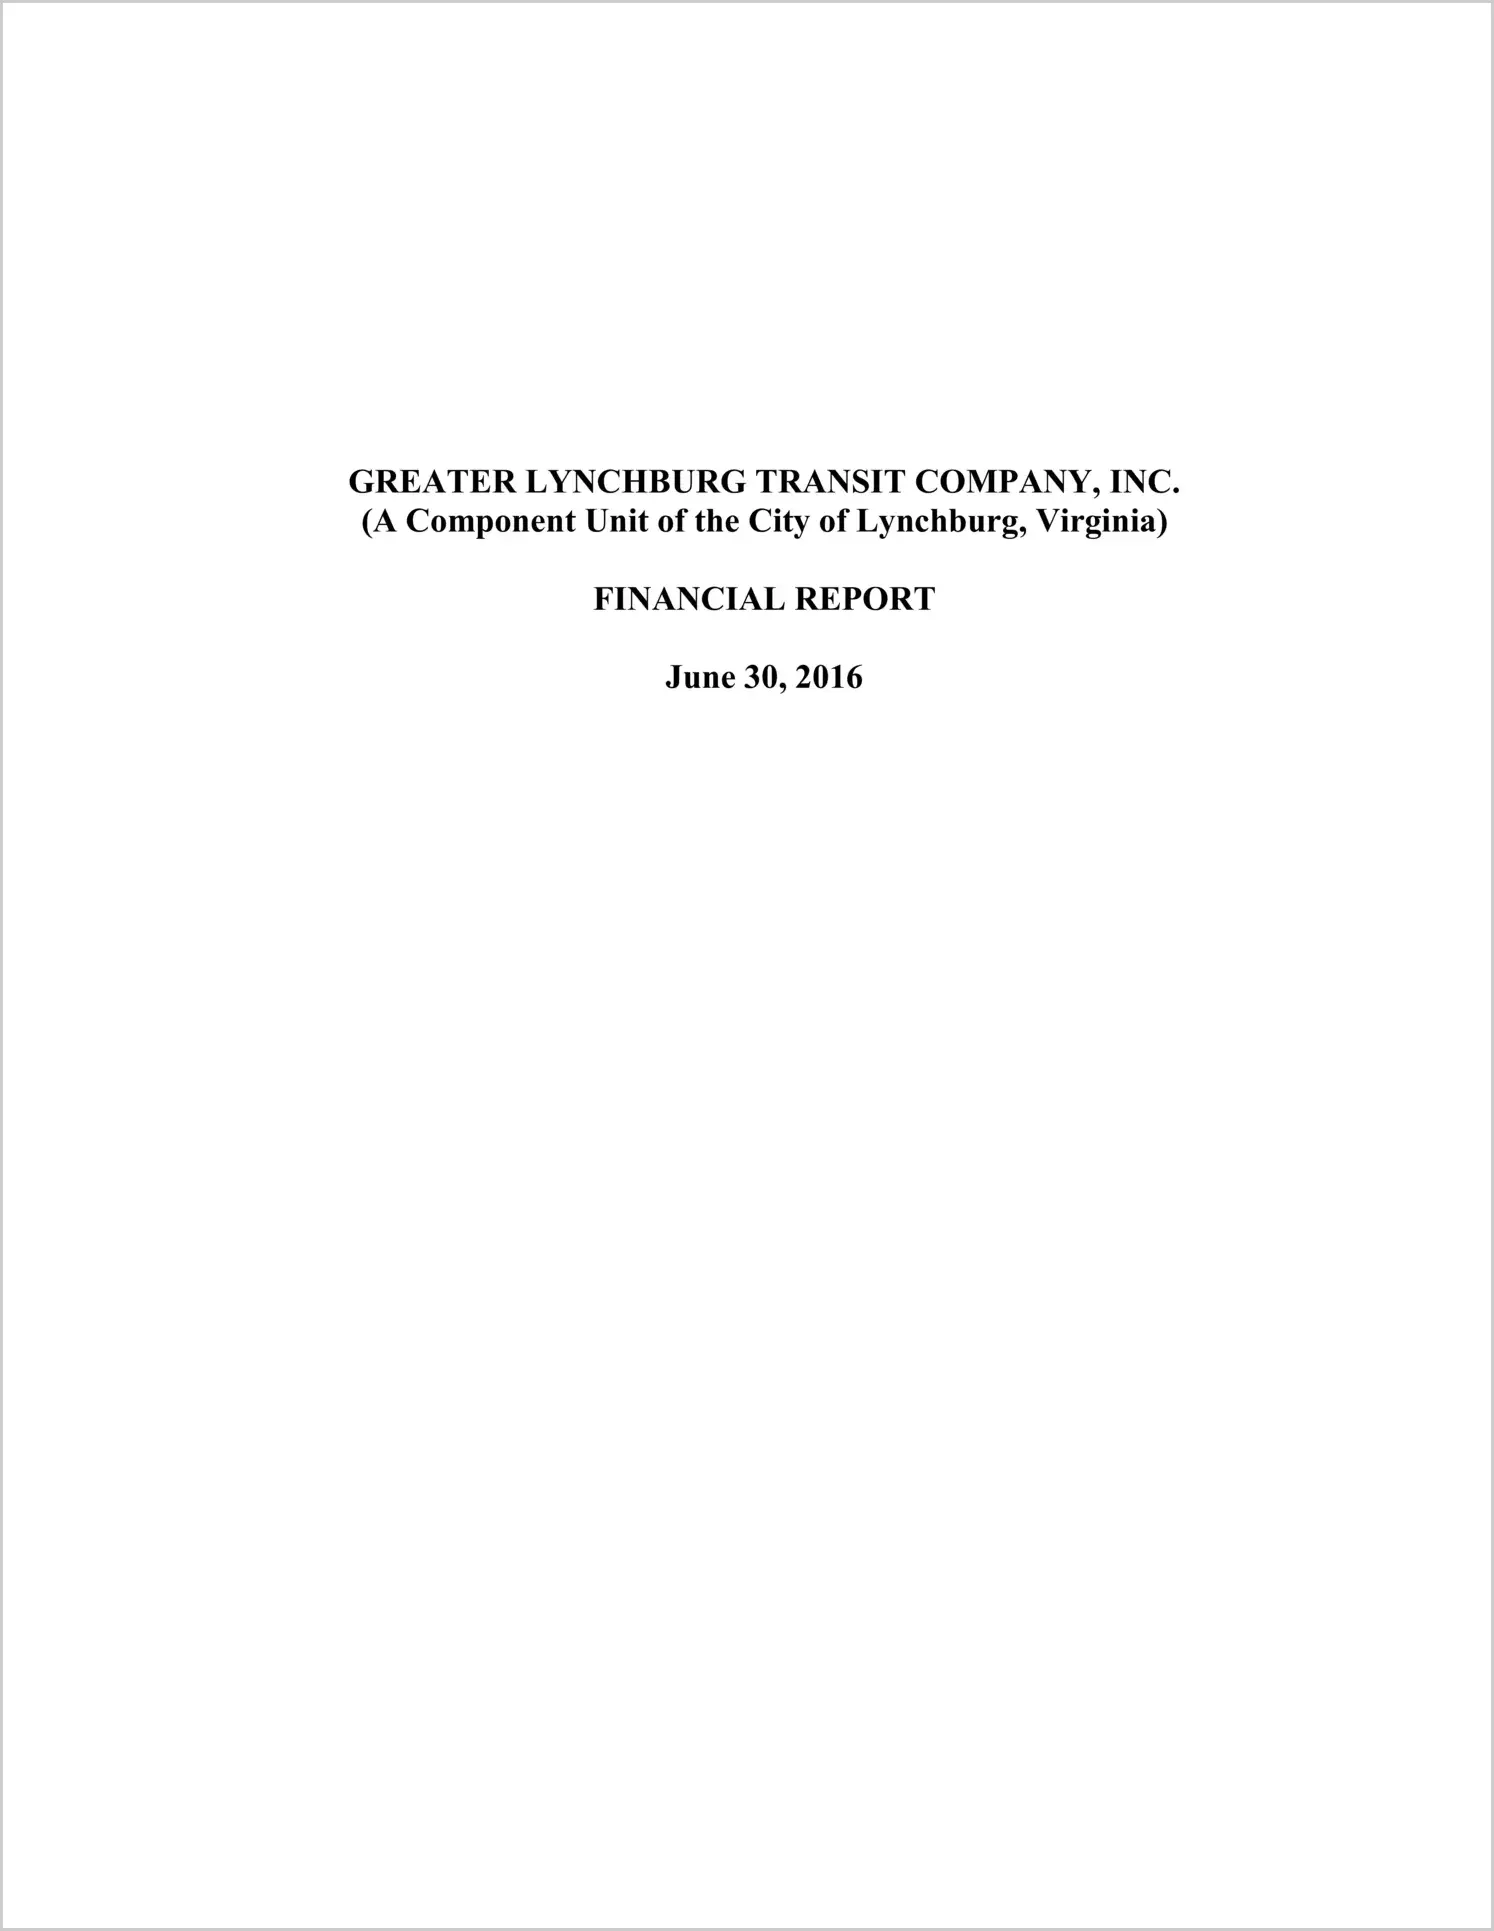 2016 ABC/Other Annual Financial Report  for Greater Lynchburg Transit Company